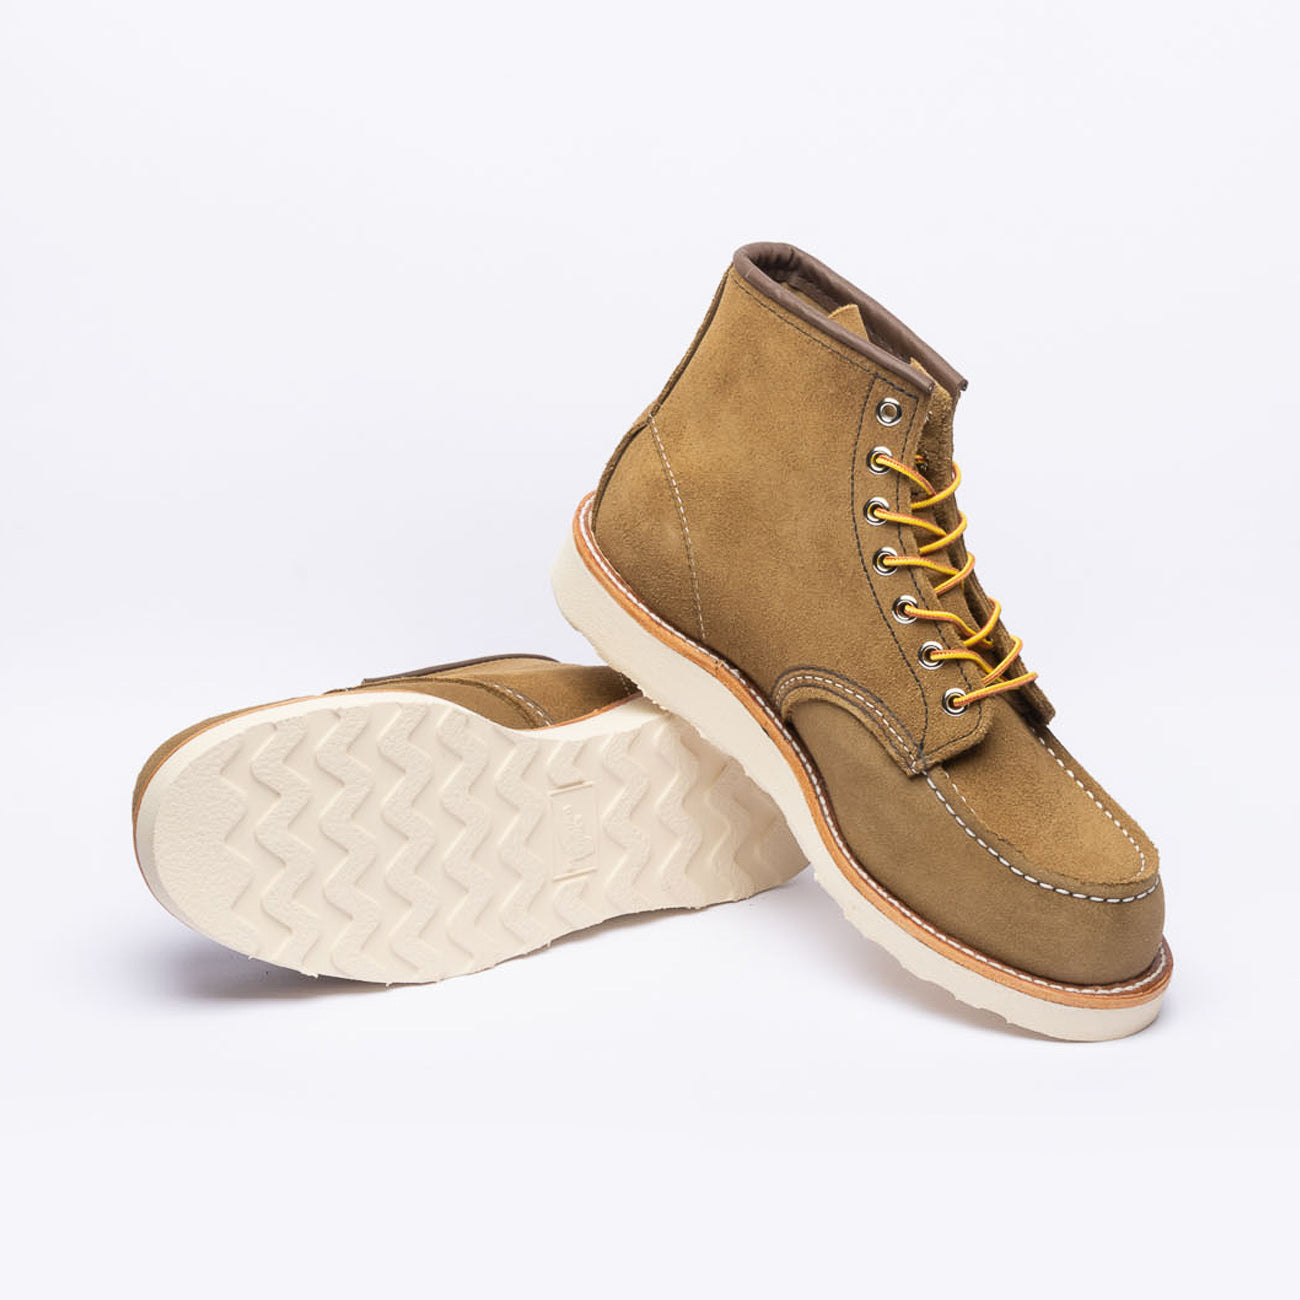 Stivale derby Red Wing 8881 in camoscio beige